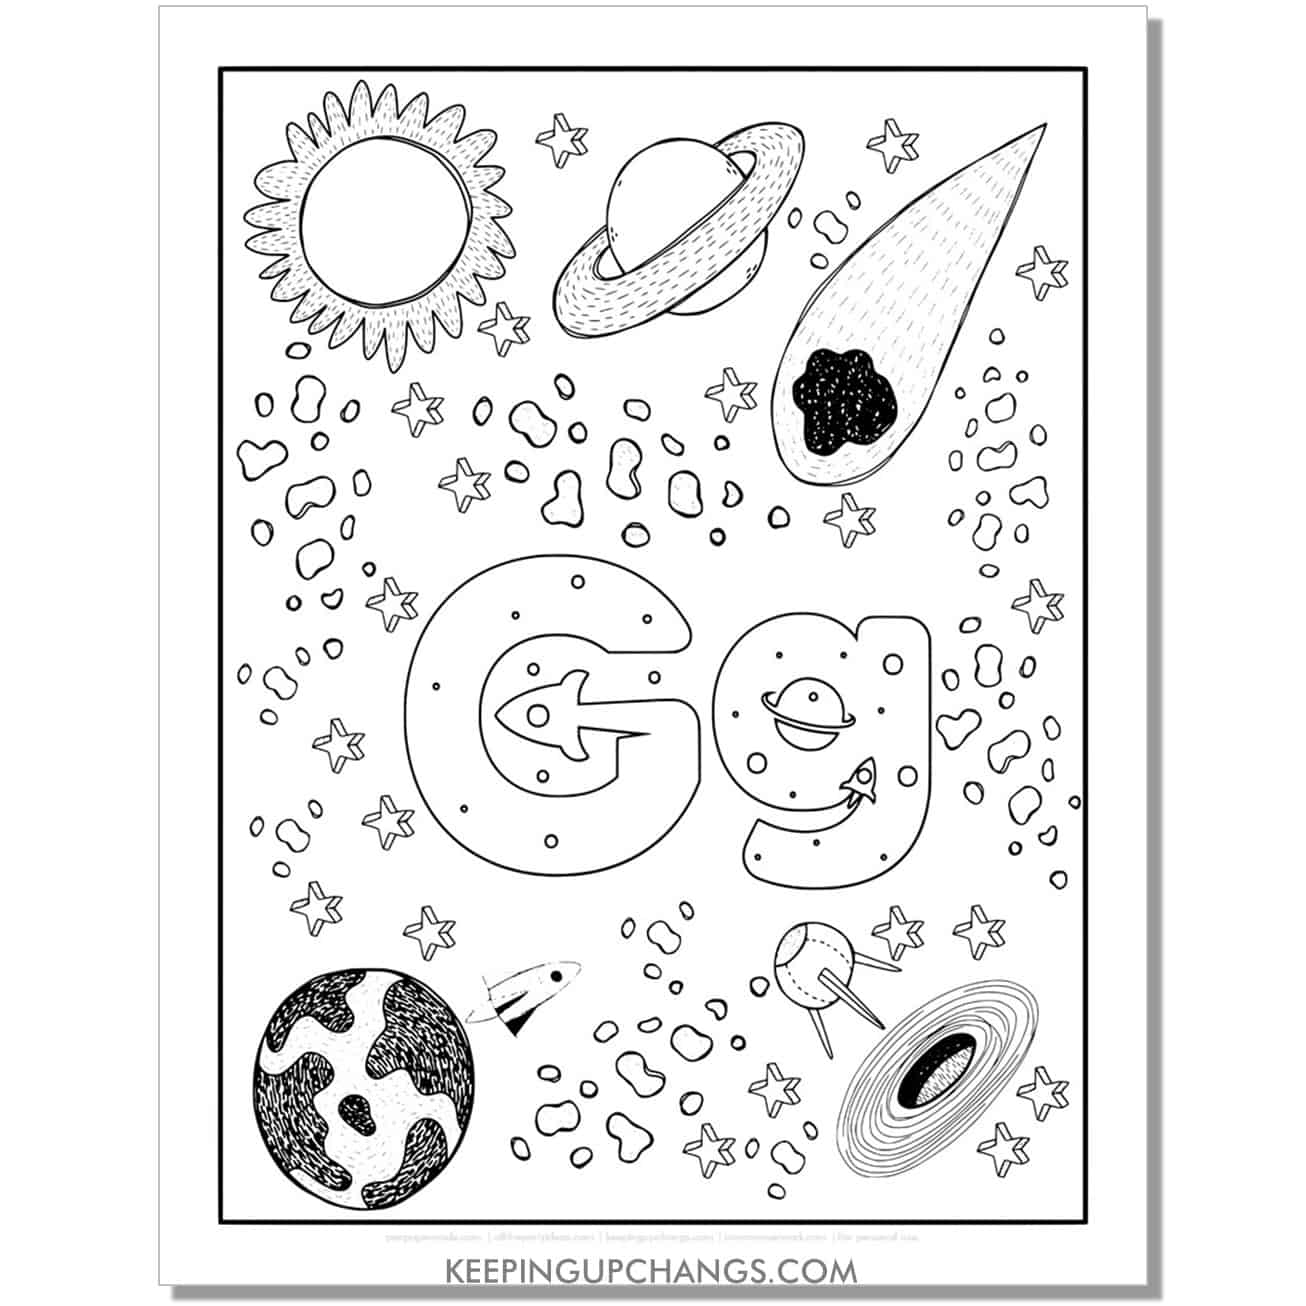 free alphabet letter g coloring page for kids with rockets, space theme.